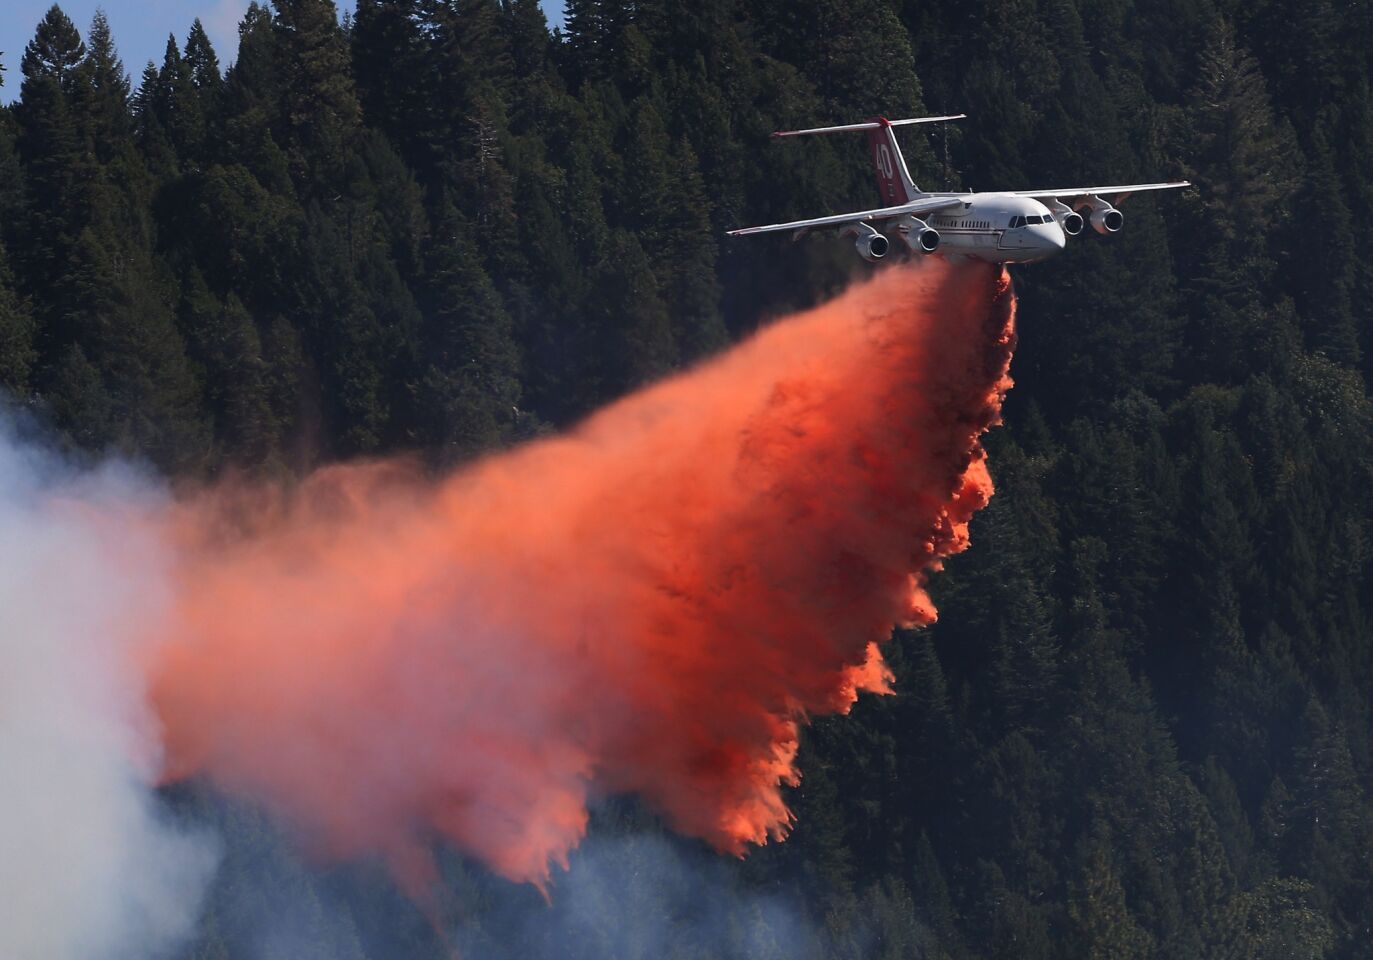 An aerial tanker drops fire retardant on the King fire near Pollock Pines, Calif., on Sept. 15.